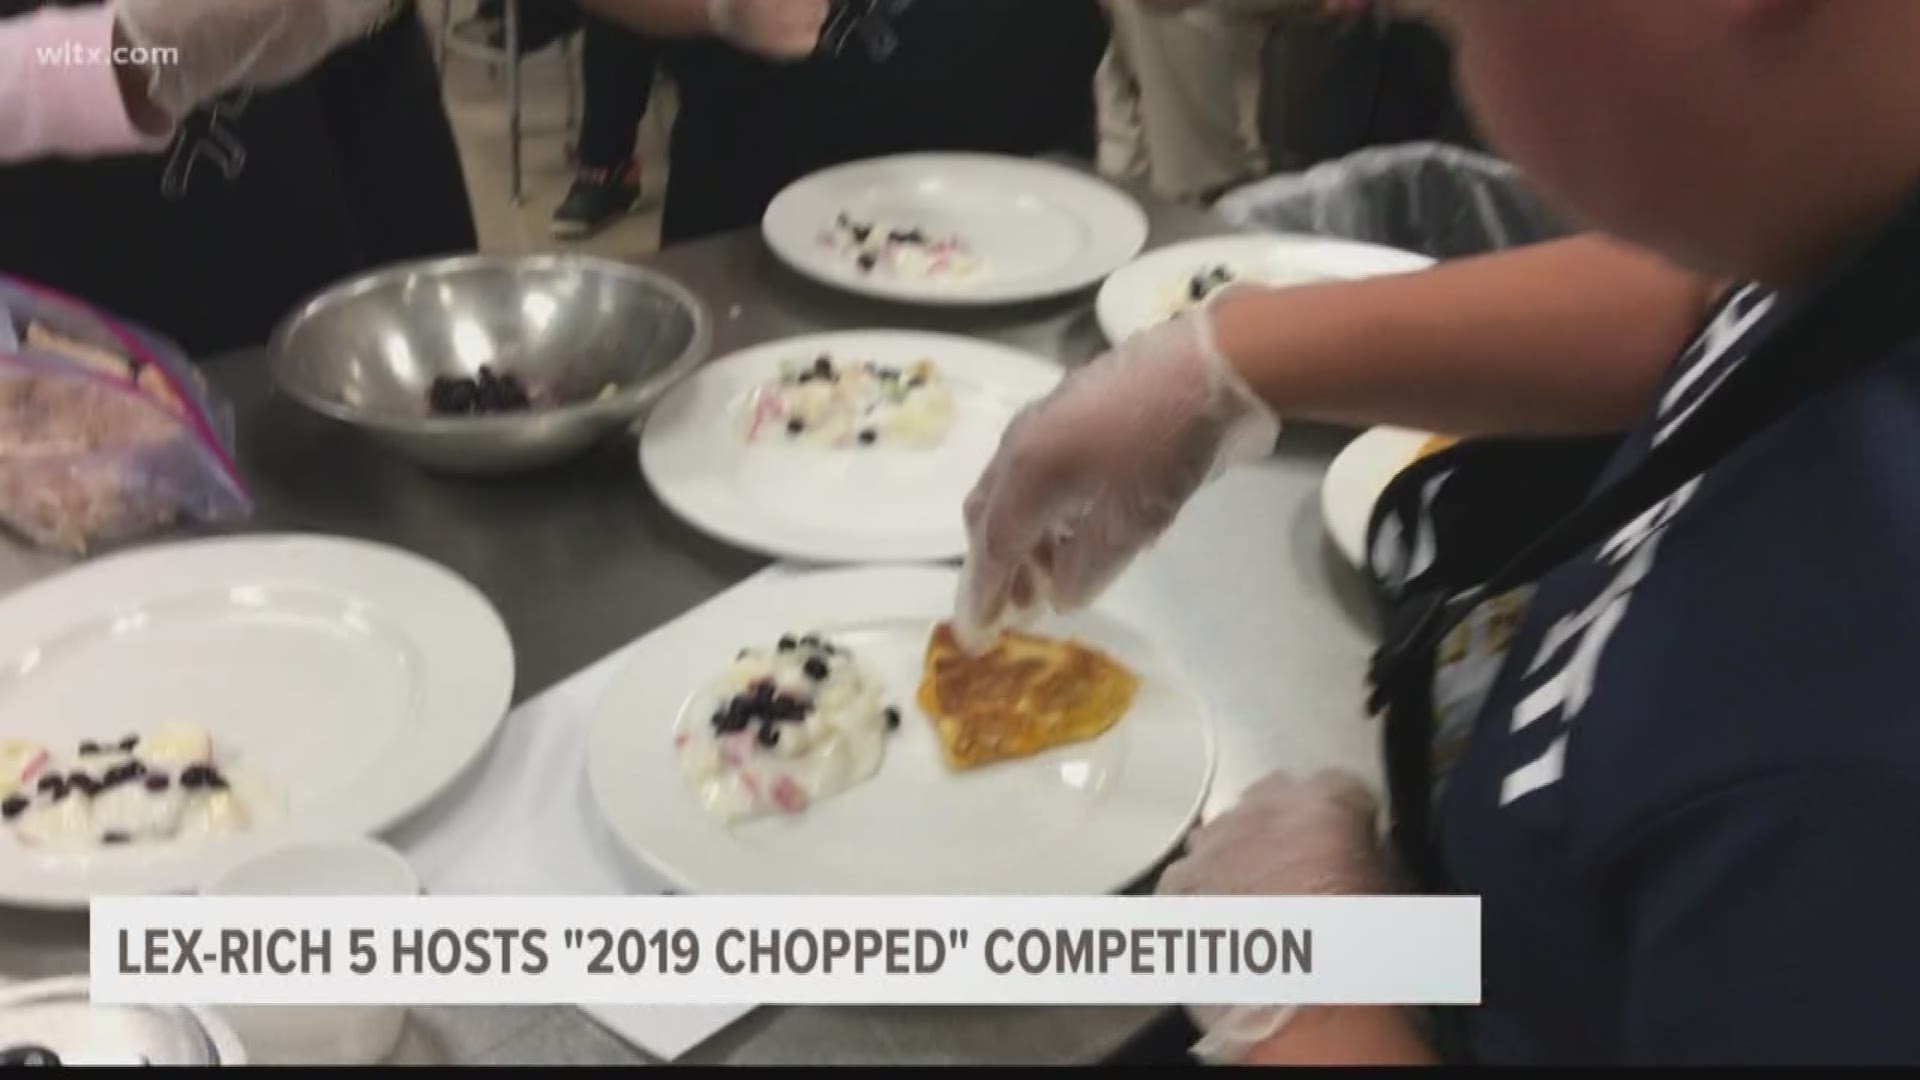 Students from five schools in the district went head to head to see who come make the best dish in 45 minutes